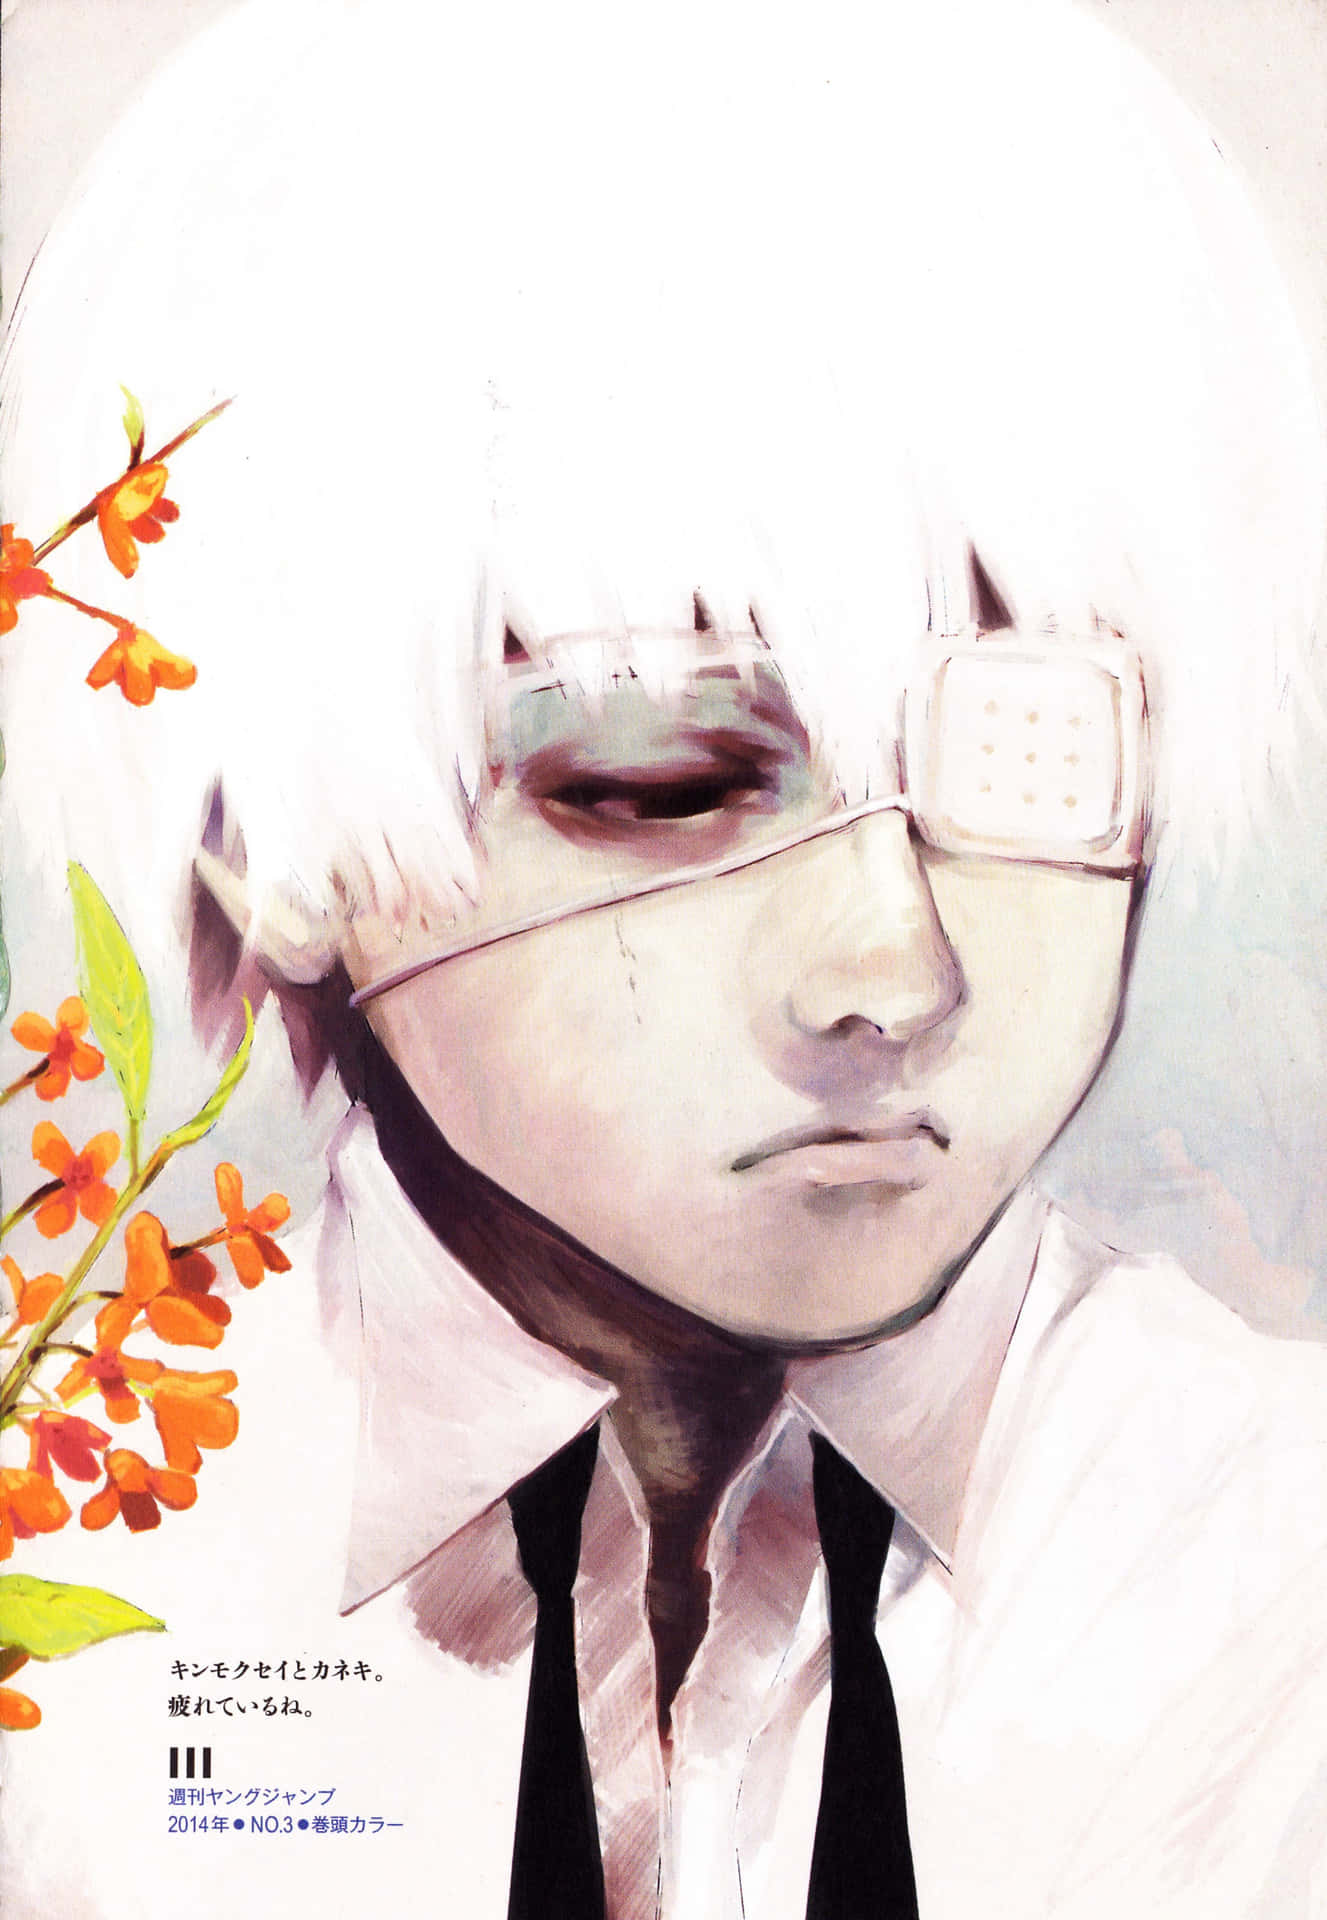 Get Inspired by the Creative Art of Sui Ishida!" Wallpaper